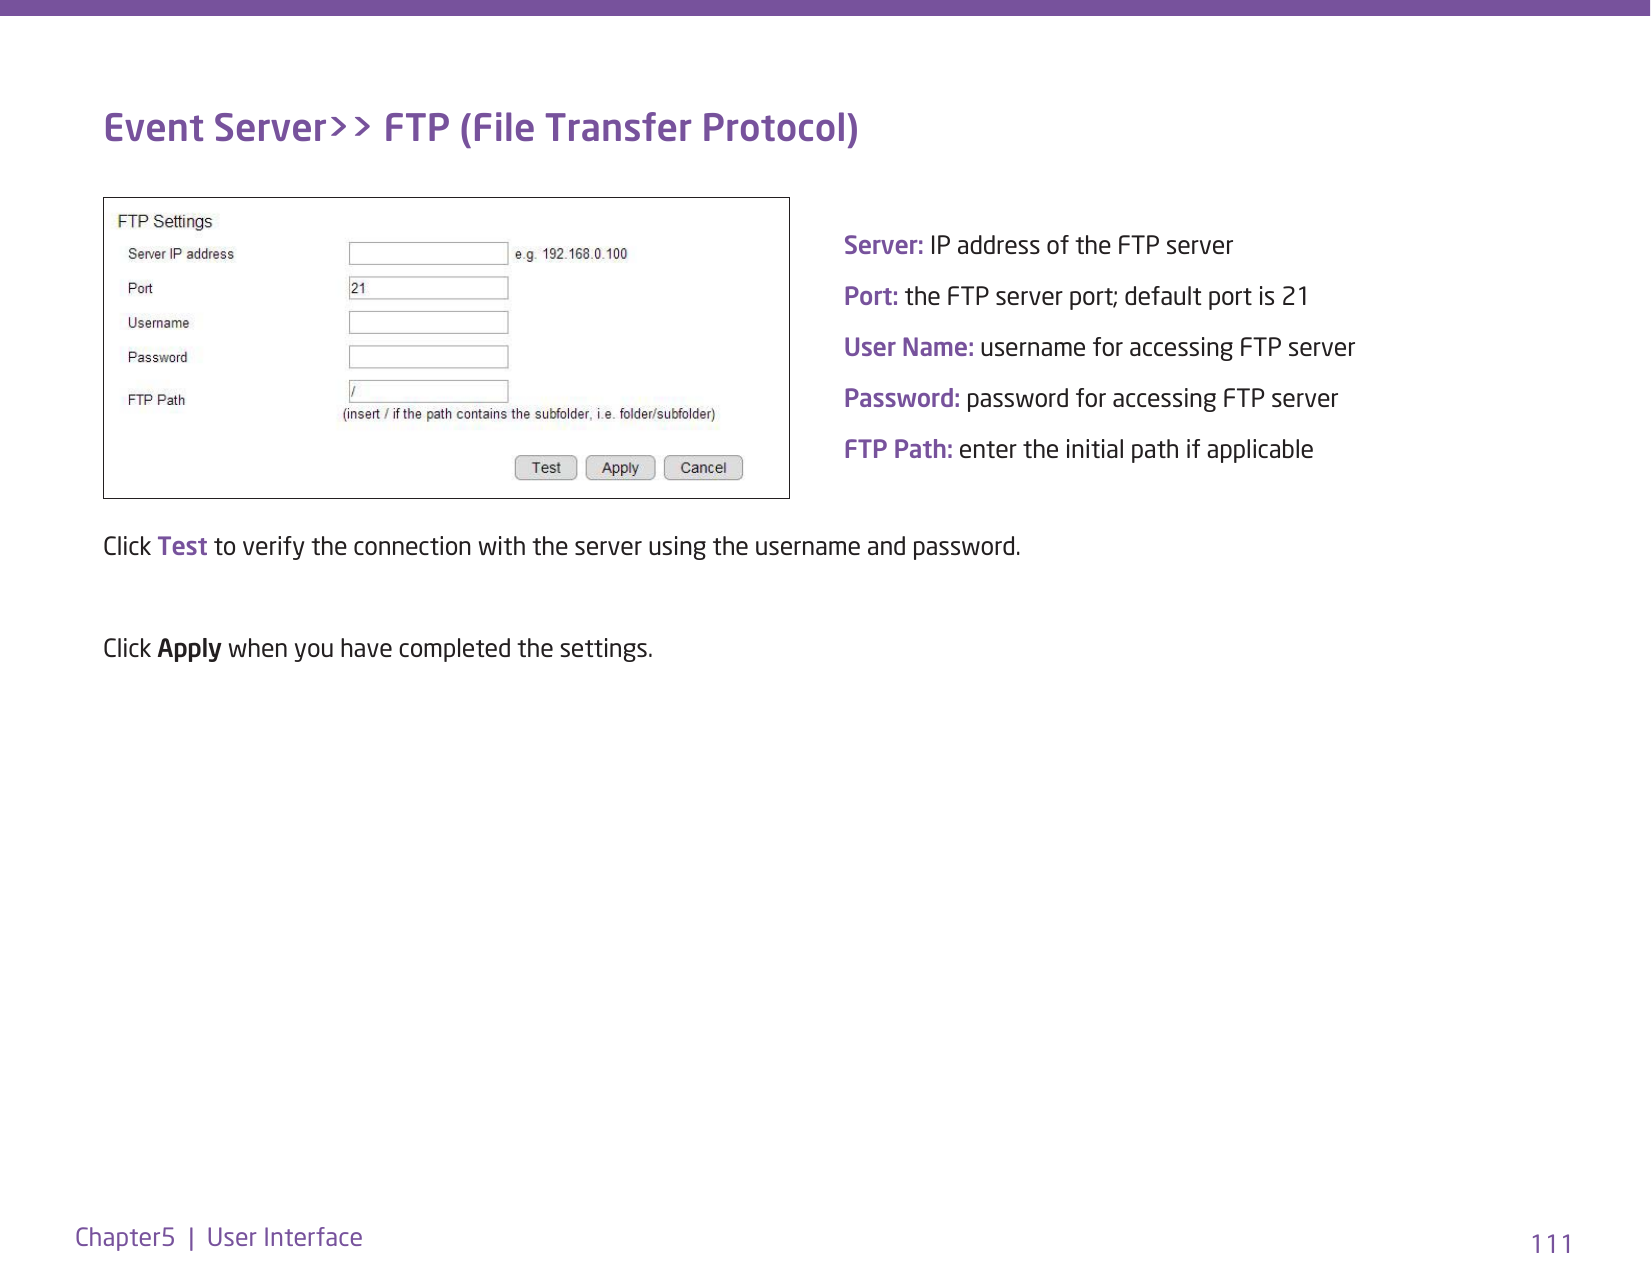 111Chapter5  |  User InterfaceEvent Server&gt;&gt; FTP (File Transfer Protocol)Server: IP address of the FTP serverPort: the FTP server port; default port is 21User Name: username for accessing FTP serverPassword: password for accessing FTP serverFTP Path: enter the initial path if applicable Click Test to verify the connection with the server using the username and password.Click Apply when you have completed the settings.